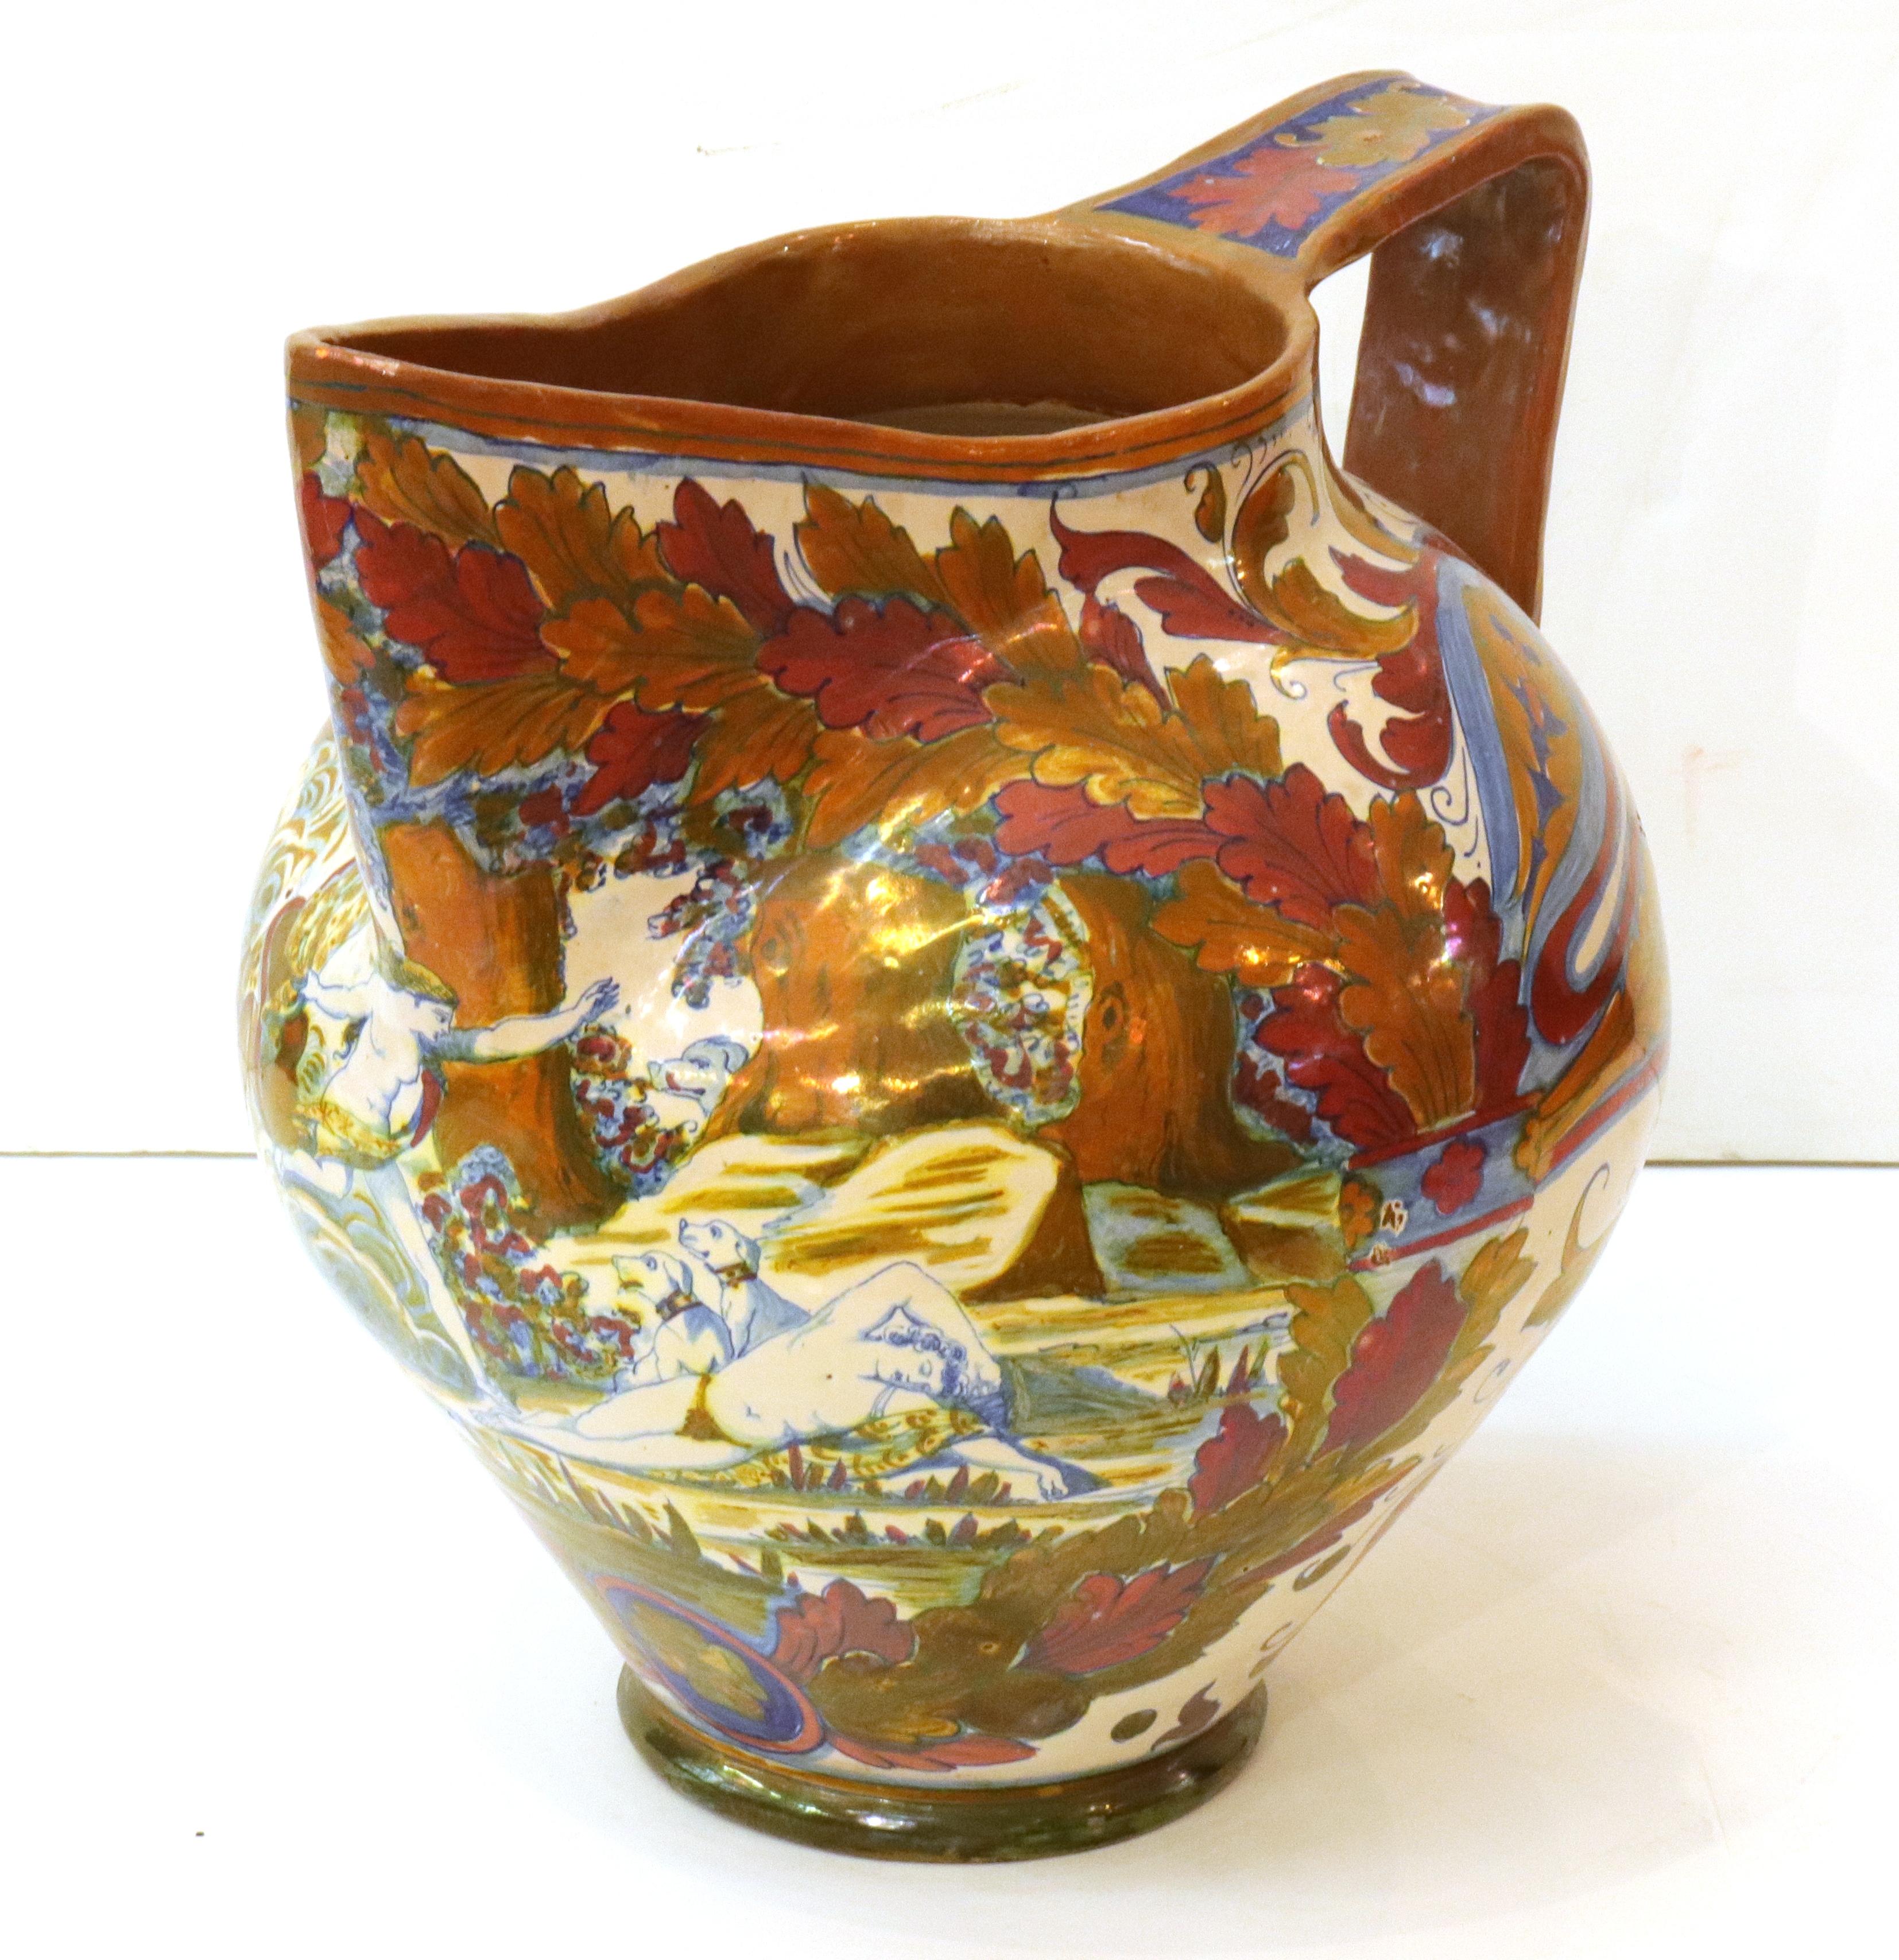 Italian Renaissance Revival large painted ceramic lusterware vessel in pitcher form. The piece has a painted front with a Renaissance inspired scene and a refined metallic iridescent glaze. Made in Italy during the 19th century, the piece is marked